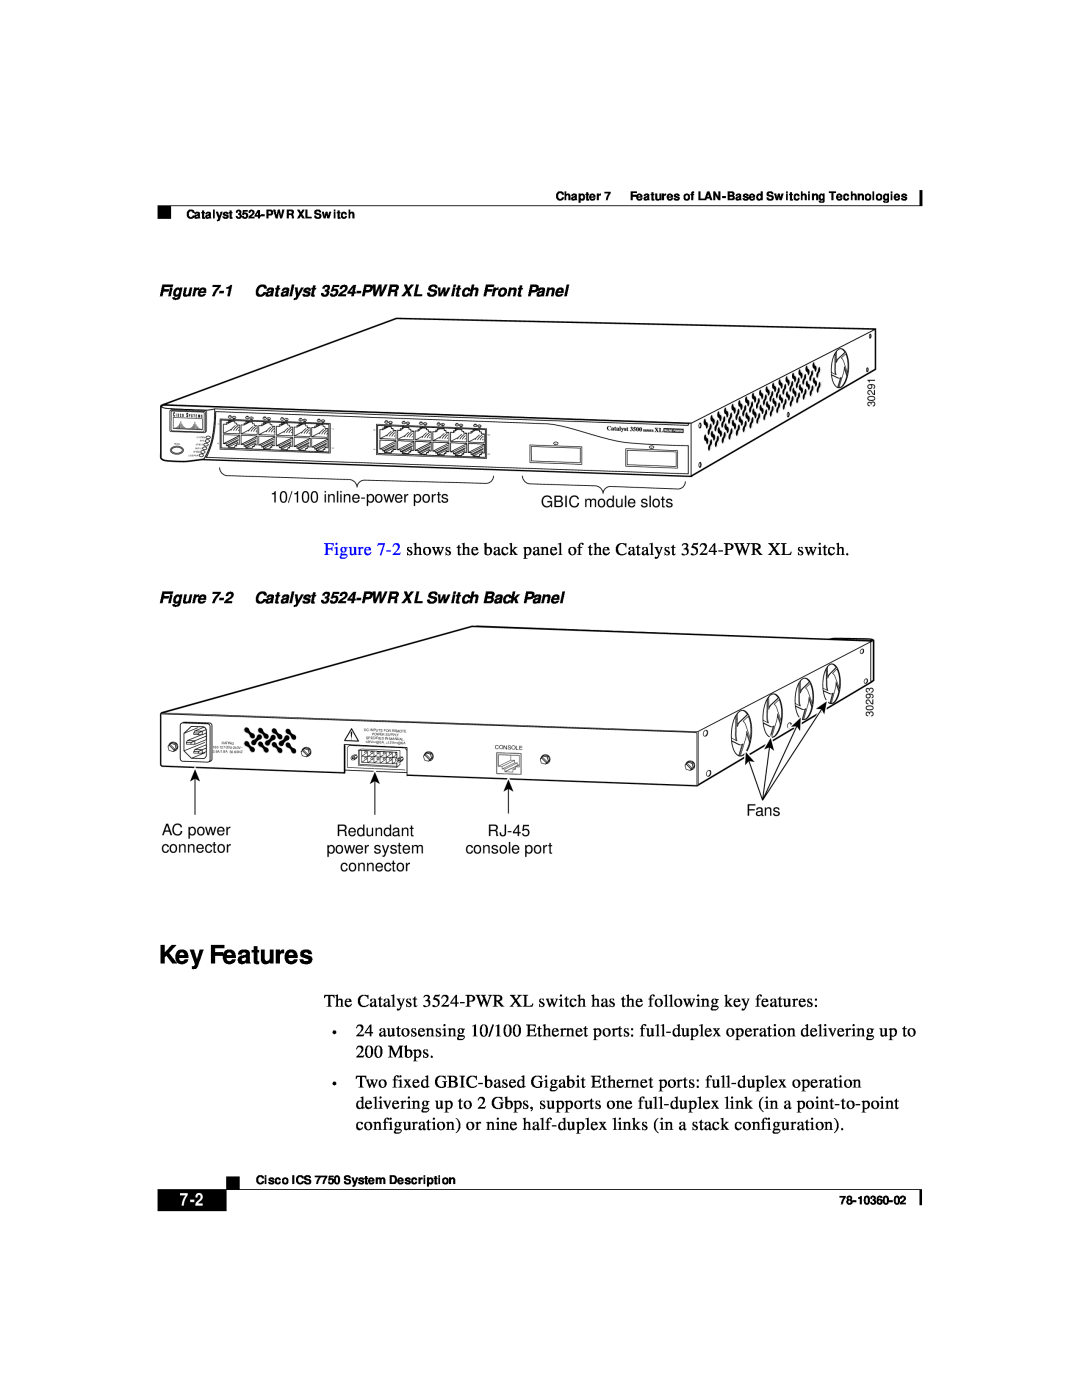 Cisco Systems ICS-7750 manual Key Features, 2 shows the back panel of the Catalyst 3524-PWR XL switch 